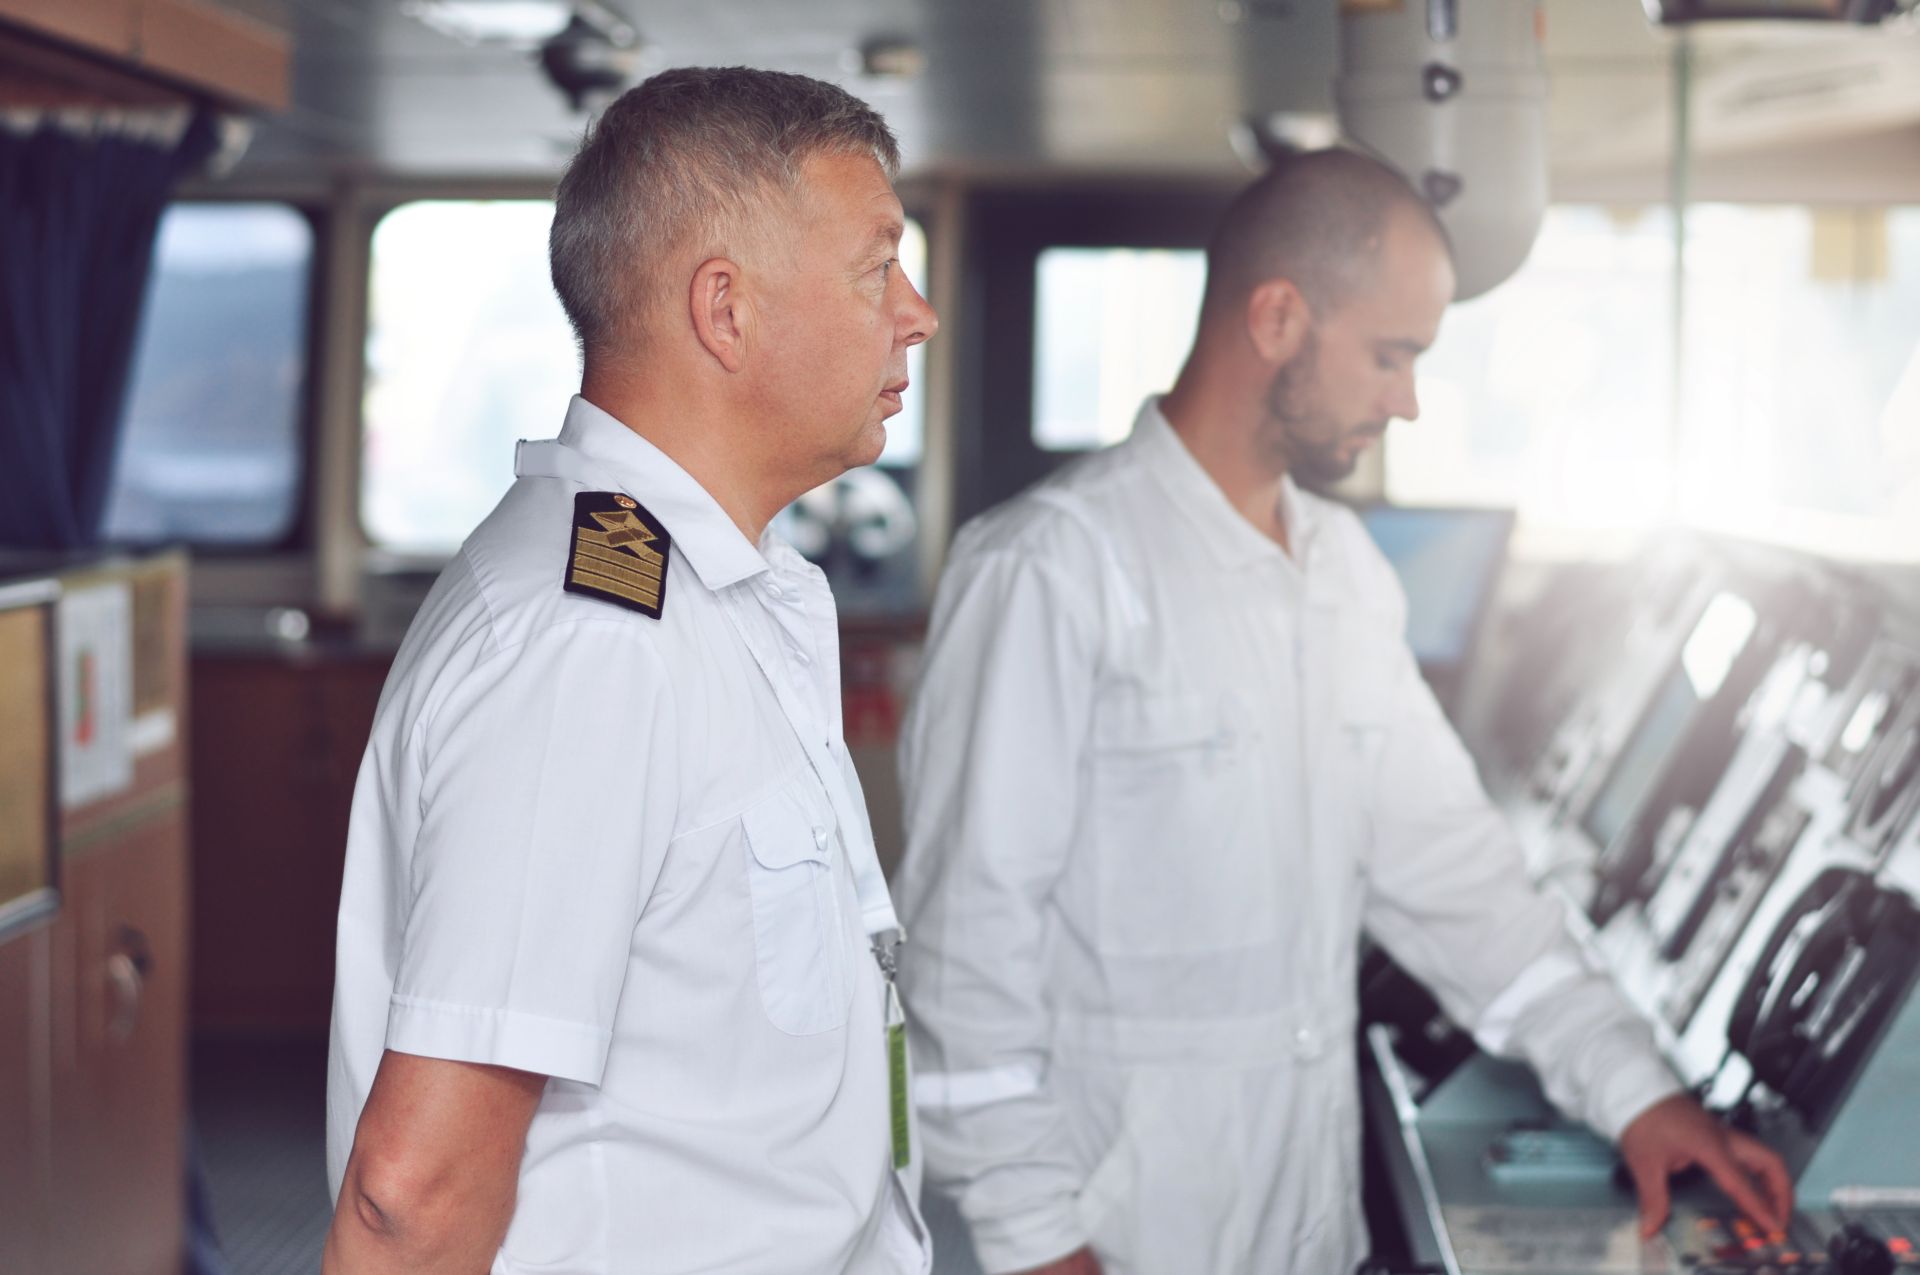 Senior maritime officer mentoring a fellow crew member, aligning with the collaborative spirit of the Mentoring and Peer Programme.